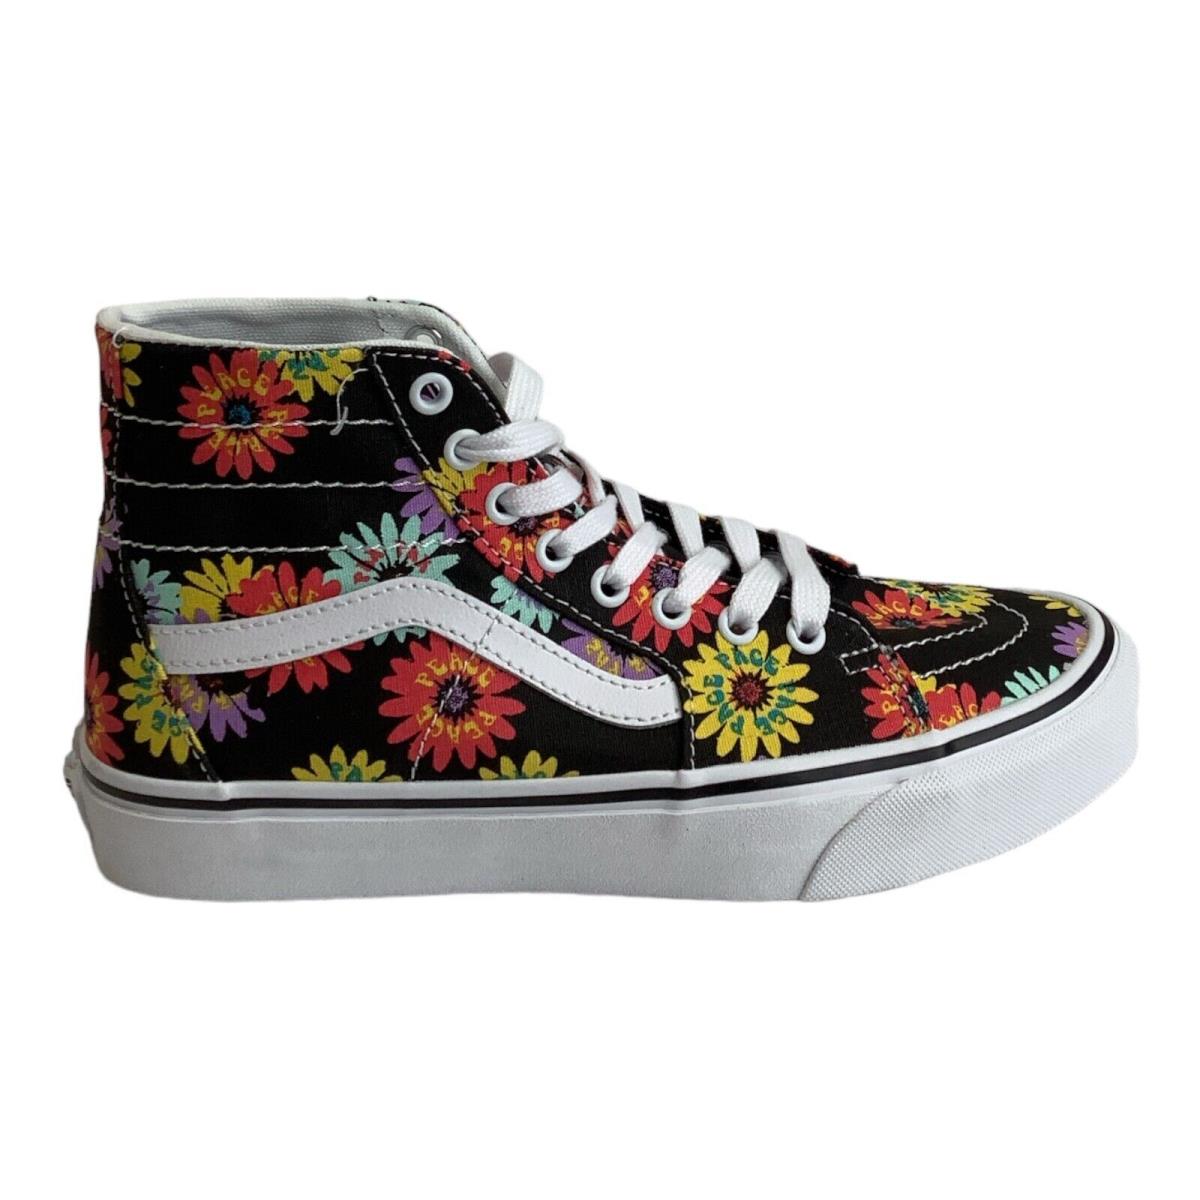 Vans Sk8-Hi Tapered Skating Shoes High Top Peace Floral M 7.5 W 9 EU 40 - White